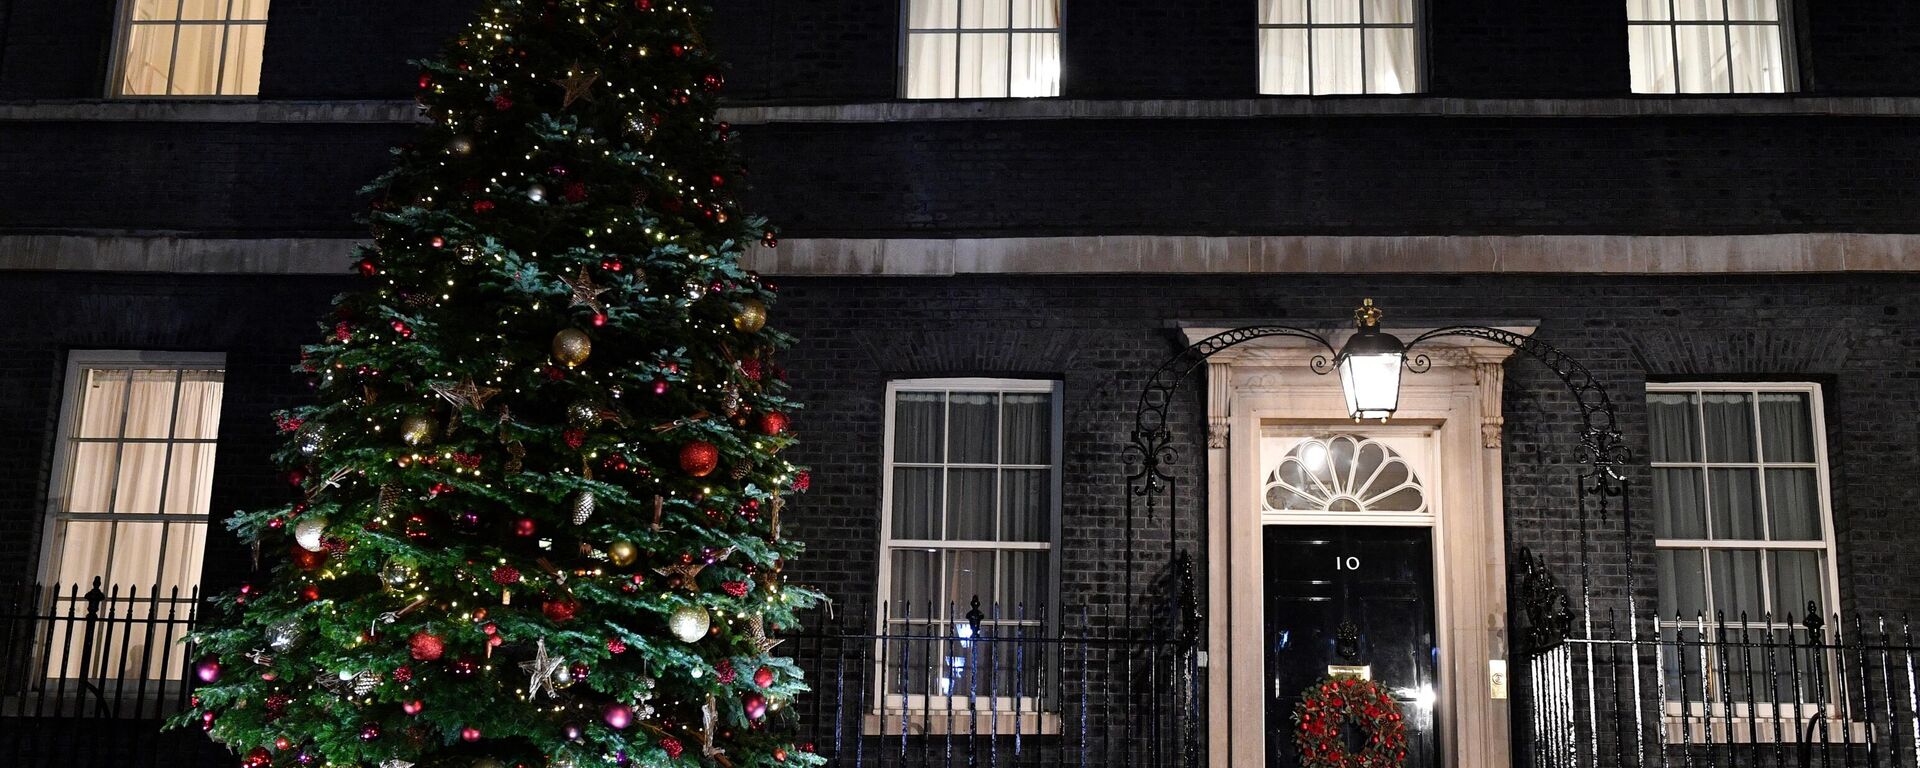 The annual Downing Street Christmas tree is pictured outside 10 Downing Street, in central London on December 1, 2021. (Photo by JUSTIN TALLIS / AFP) - Sputnik International, 1920, 18.12.2021